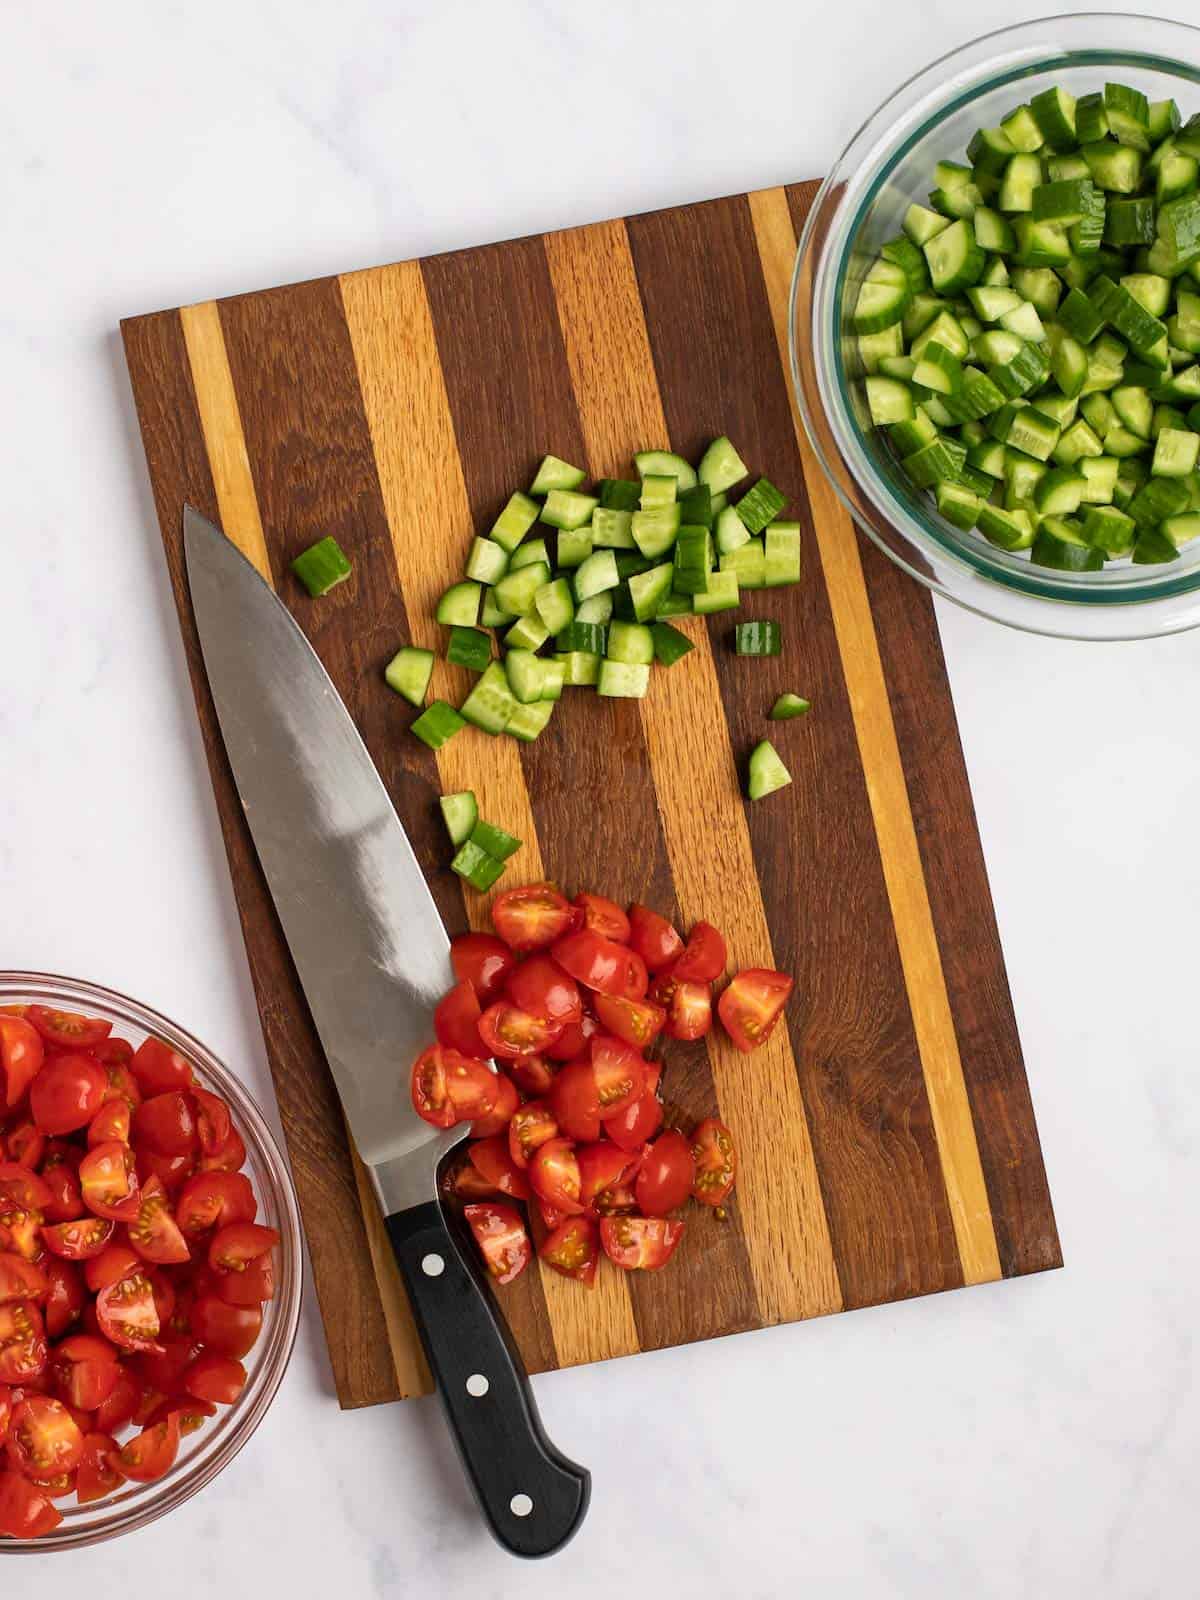 Chopped tomatoes and cucumbers on a chopping board.